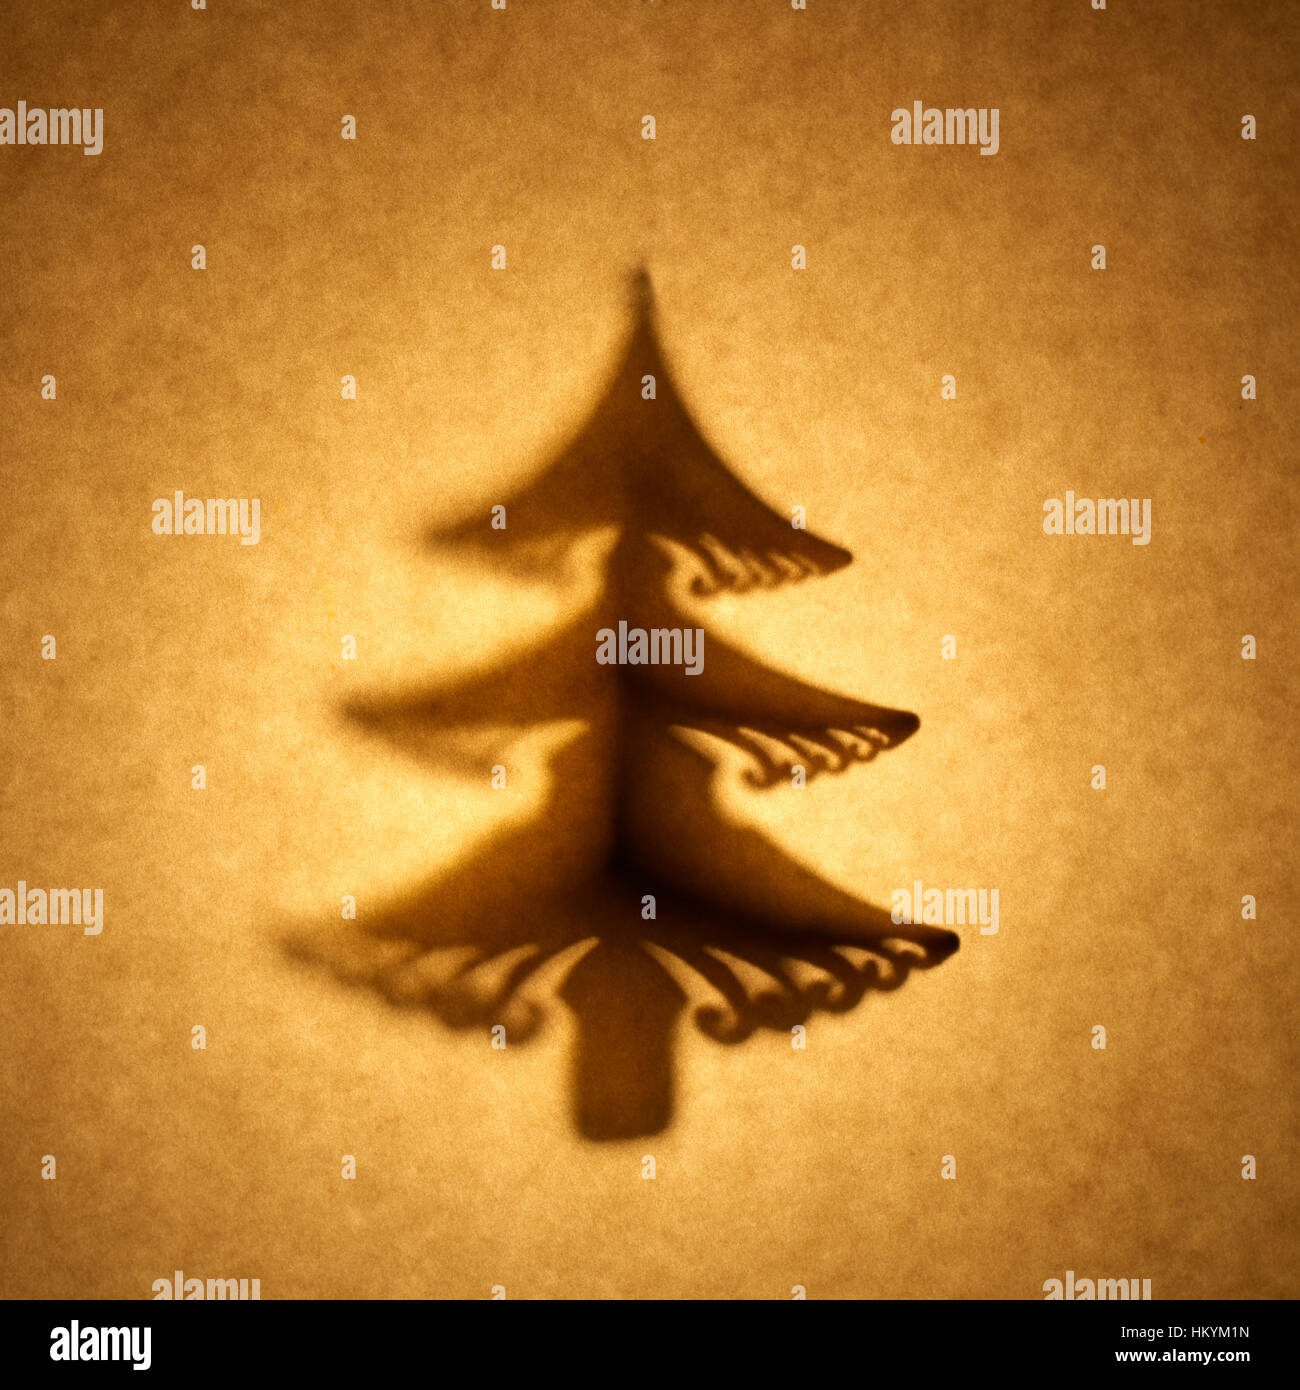 Backlit silhouette of Christmas tree shape cut out against brown tone paper, with spot highlight. Stock Photo